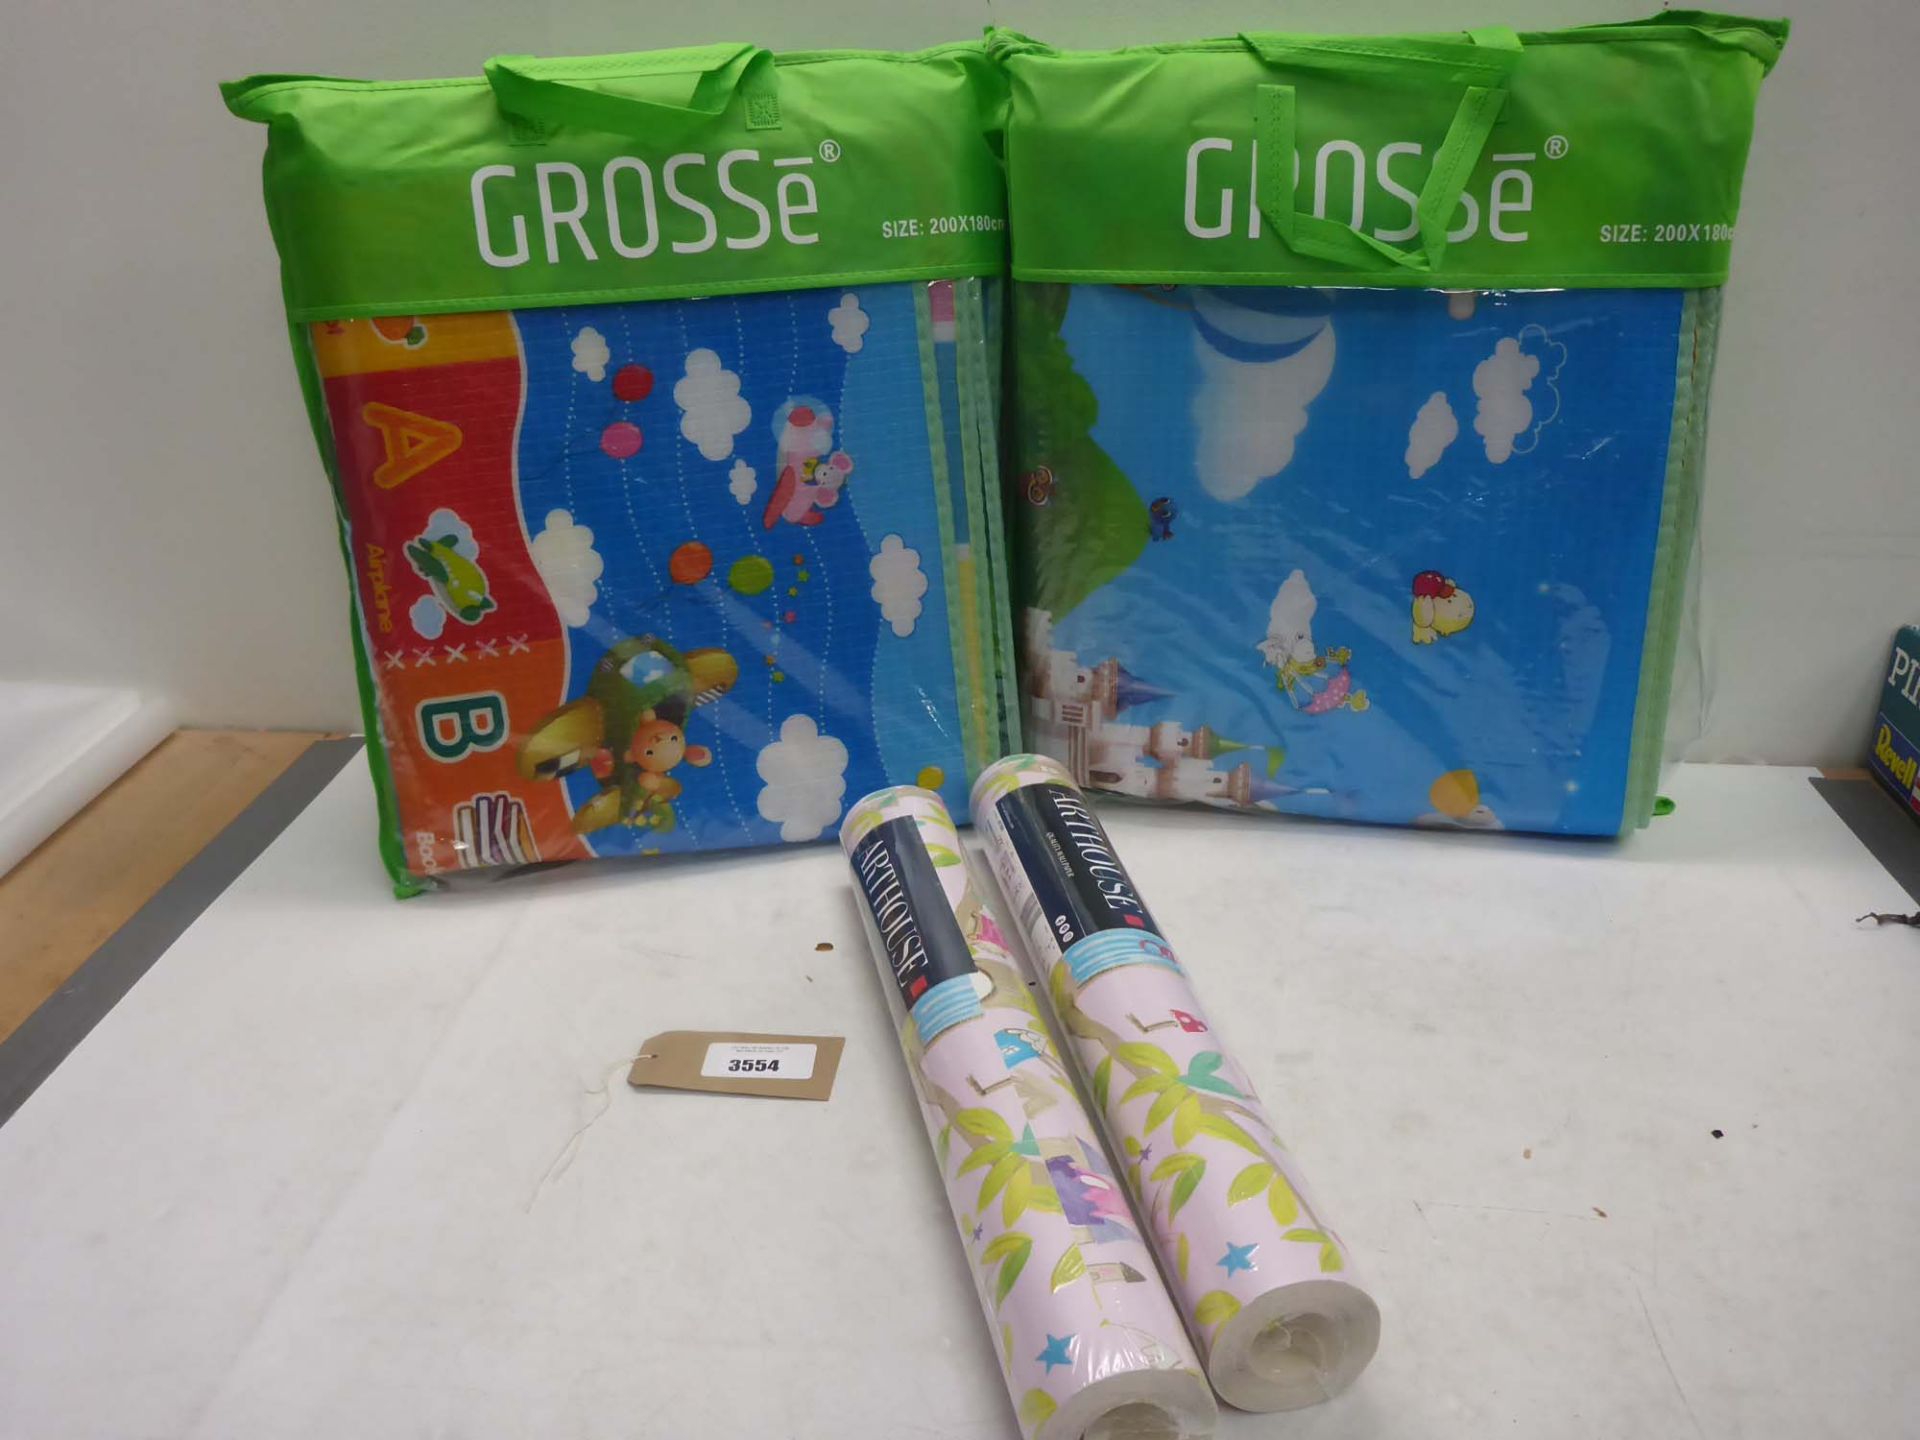 2 rolls of Arthouse Woodland Fairy design wallpaper and 2 large kids play mats